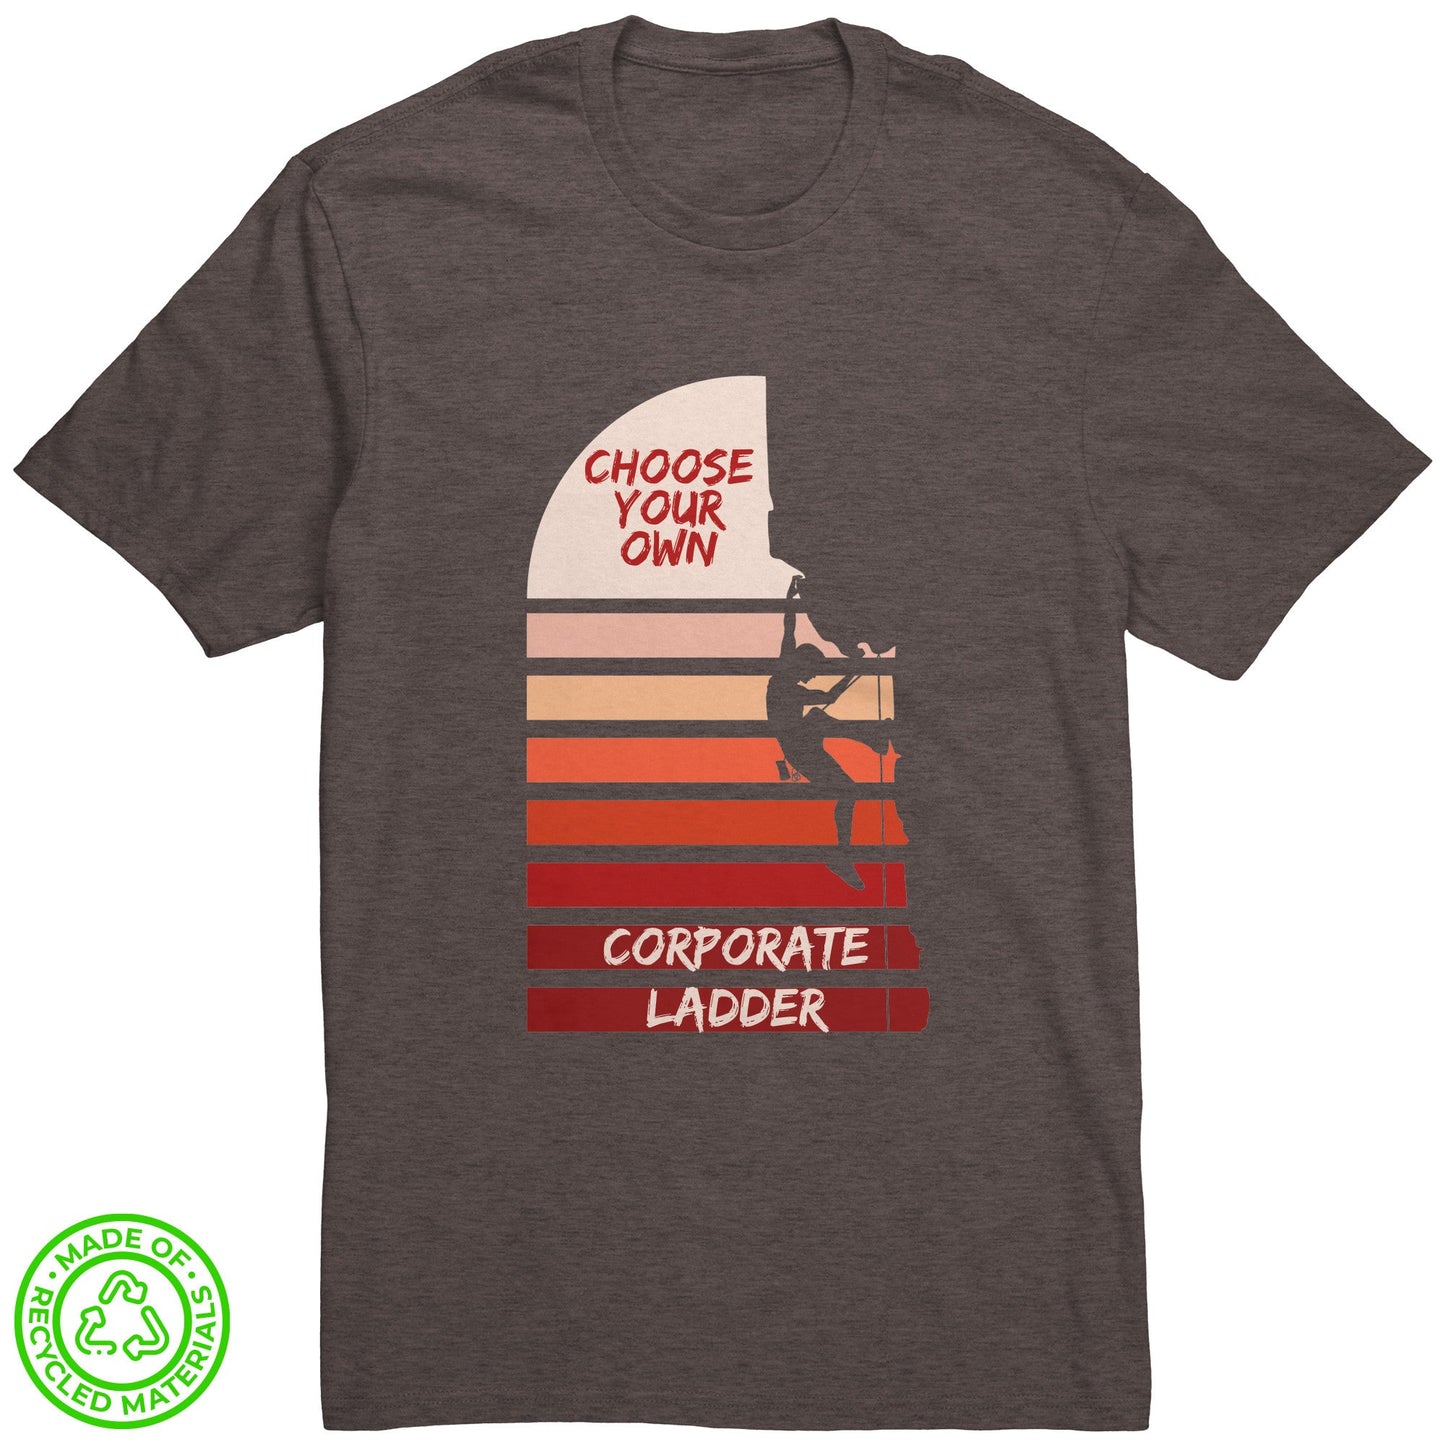 Eco-friendly Re-Tee (Choose Your Own Corporate Ladder)